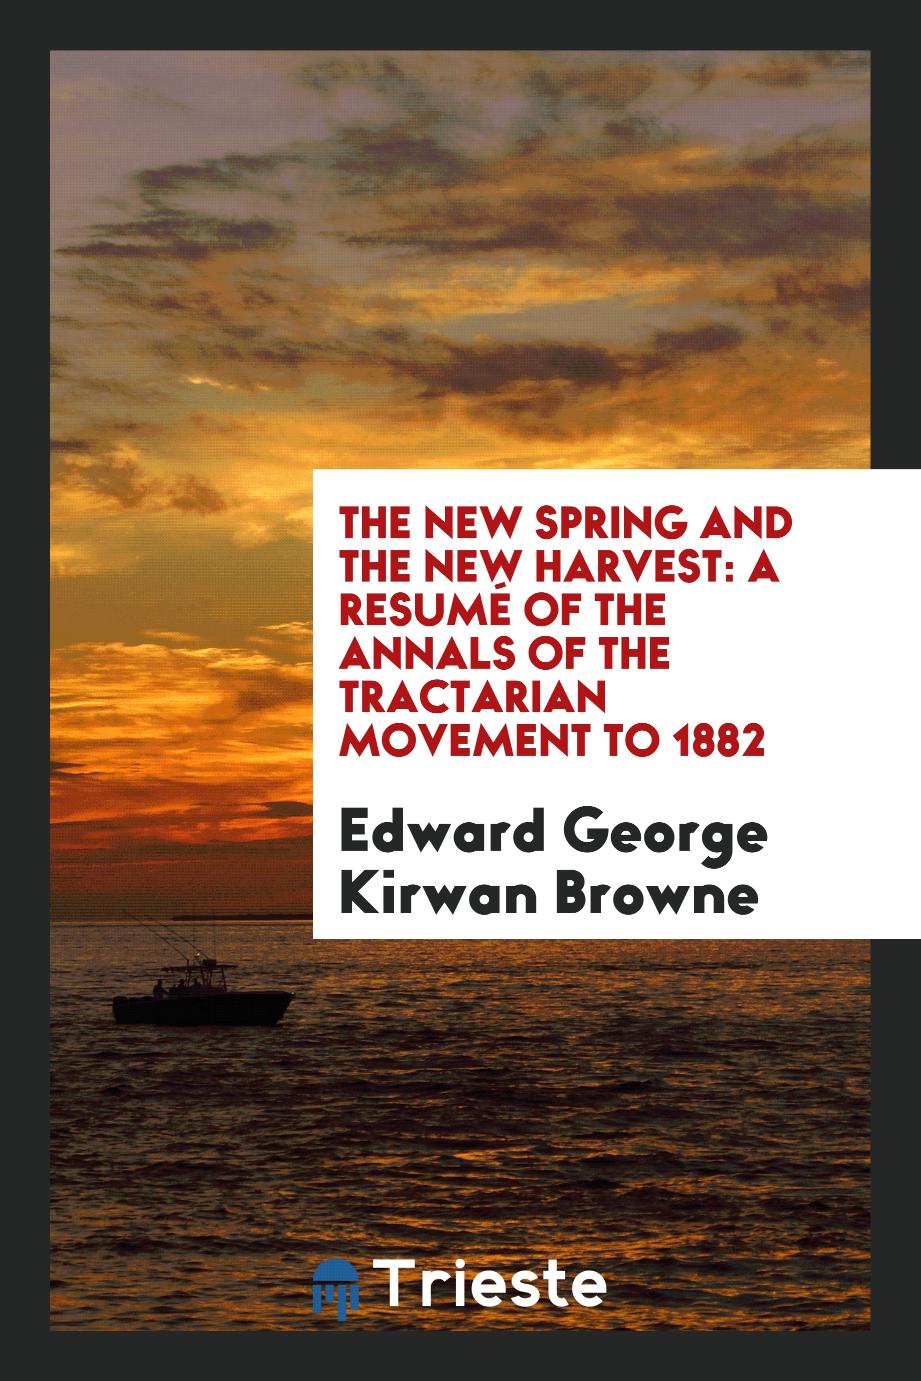 The new spring and the new harvest: a resumé of the annals of the Tractarian movement to 1882